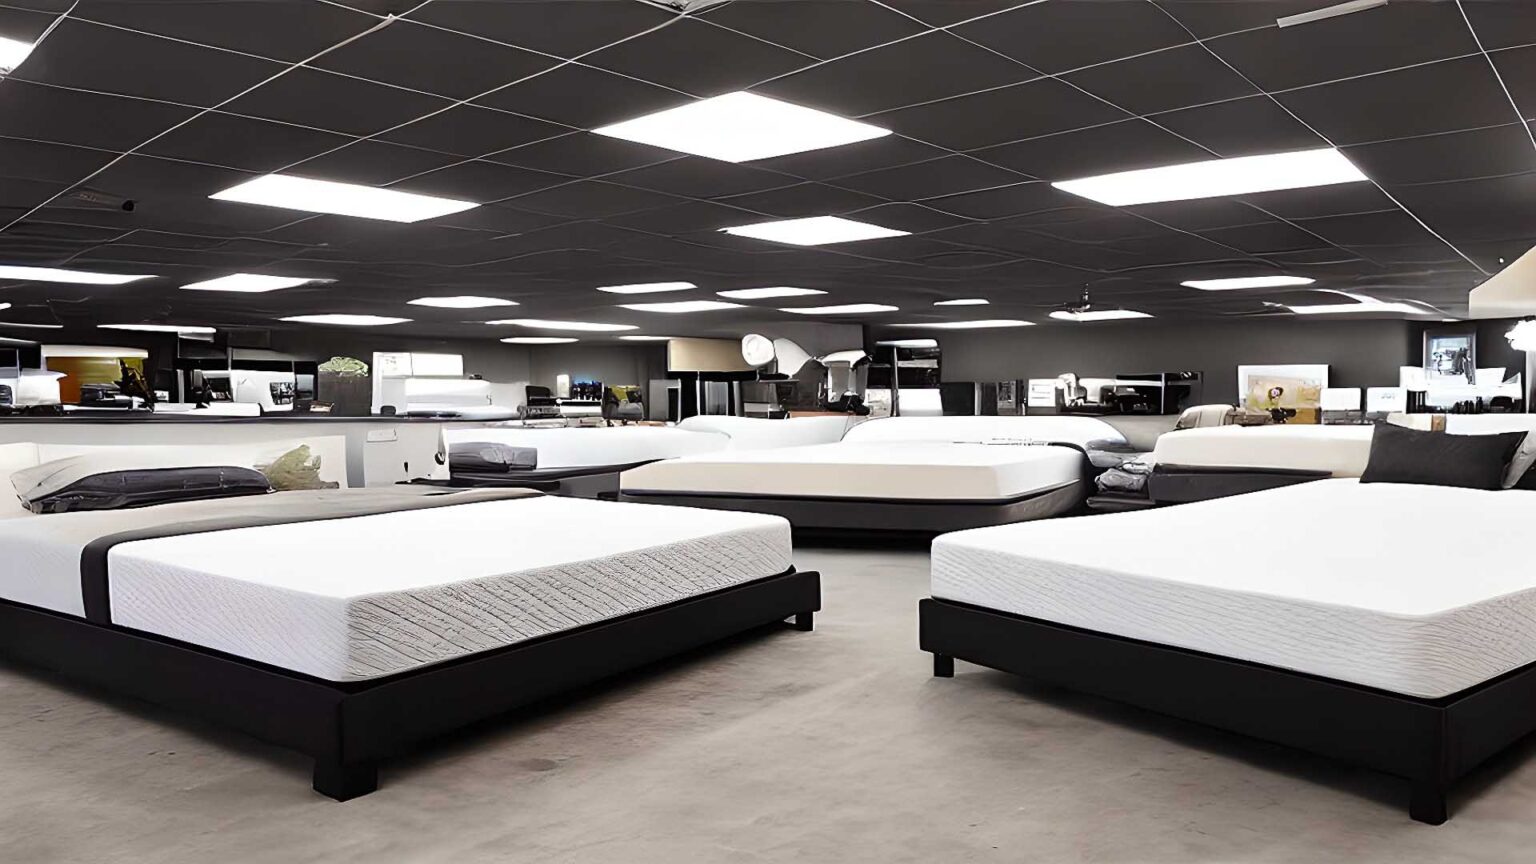 Mattress Stores, mattress dealers, and mattress retailers near me in Corvallis, OR